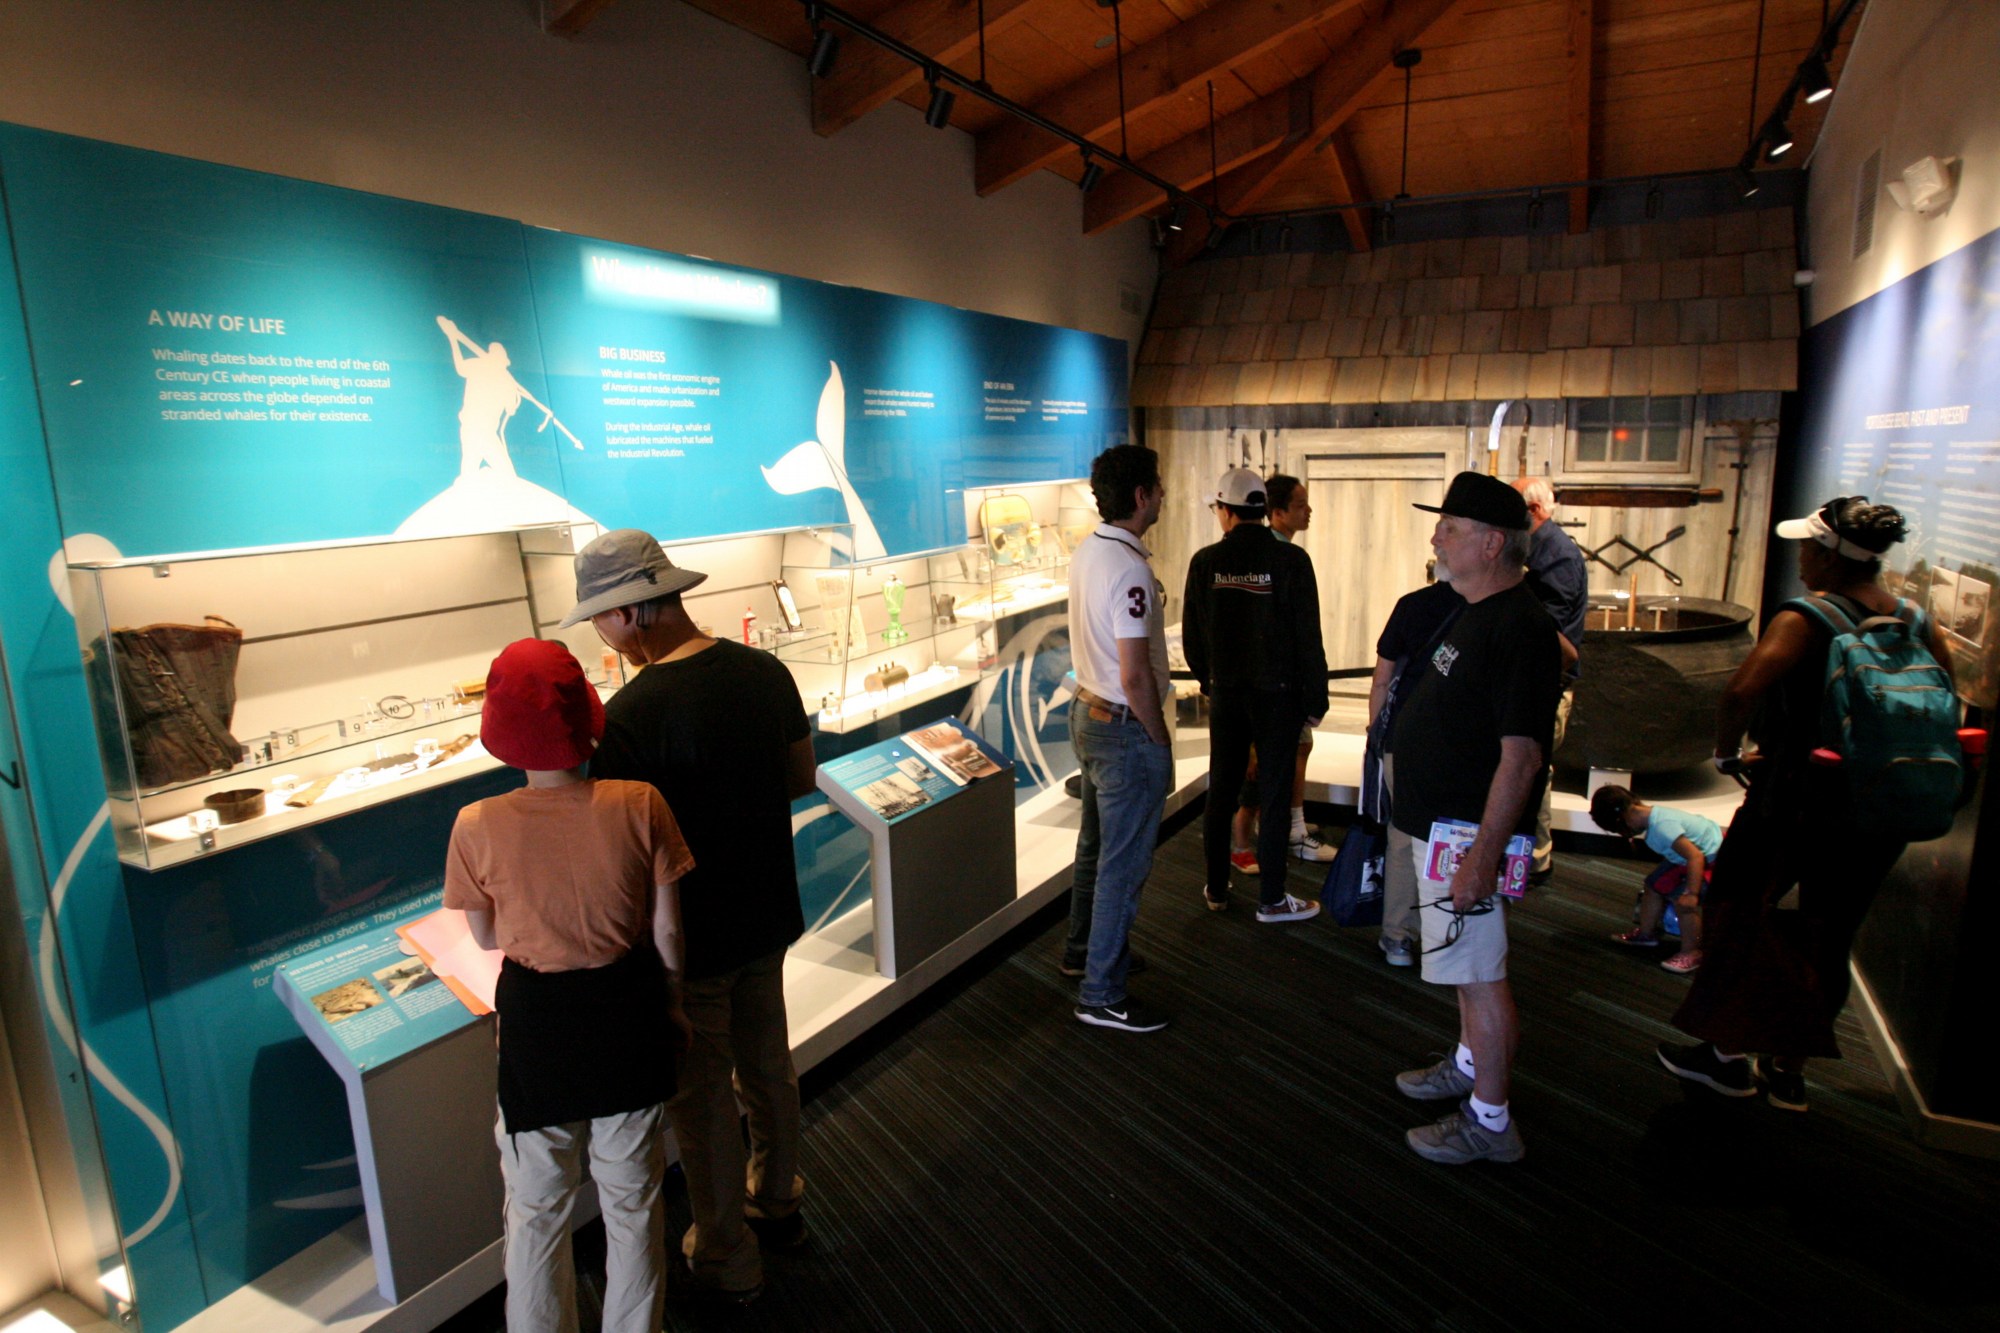 People view the Whaling exhibit of the Portuguese Bend at the Point Vicente Interpretive Center in Rancho Palos Verdes. (Photo by Ana P. Garcia, Contributing Photographer)